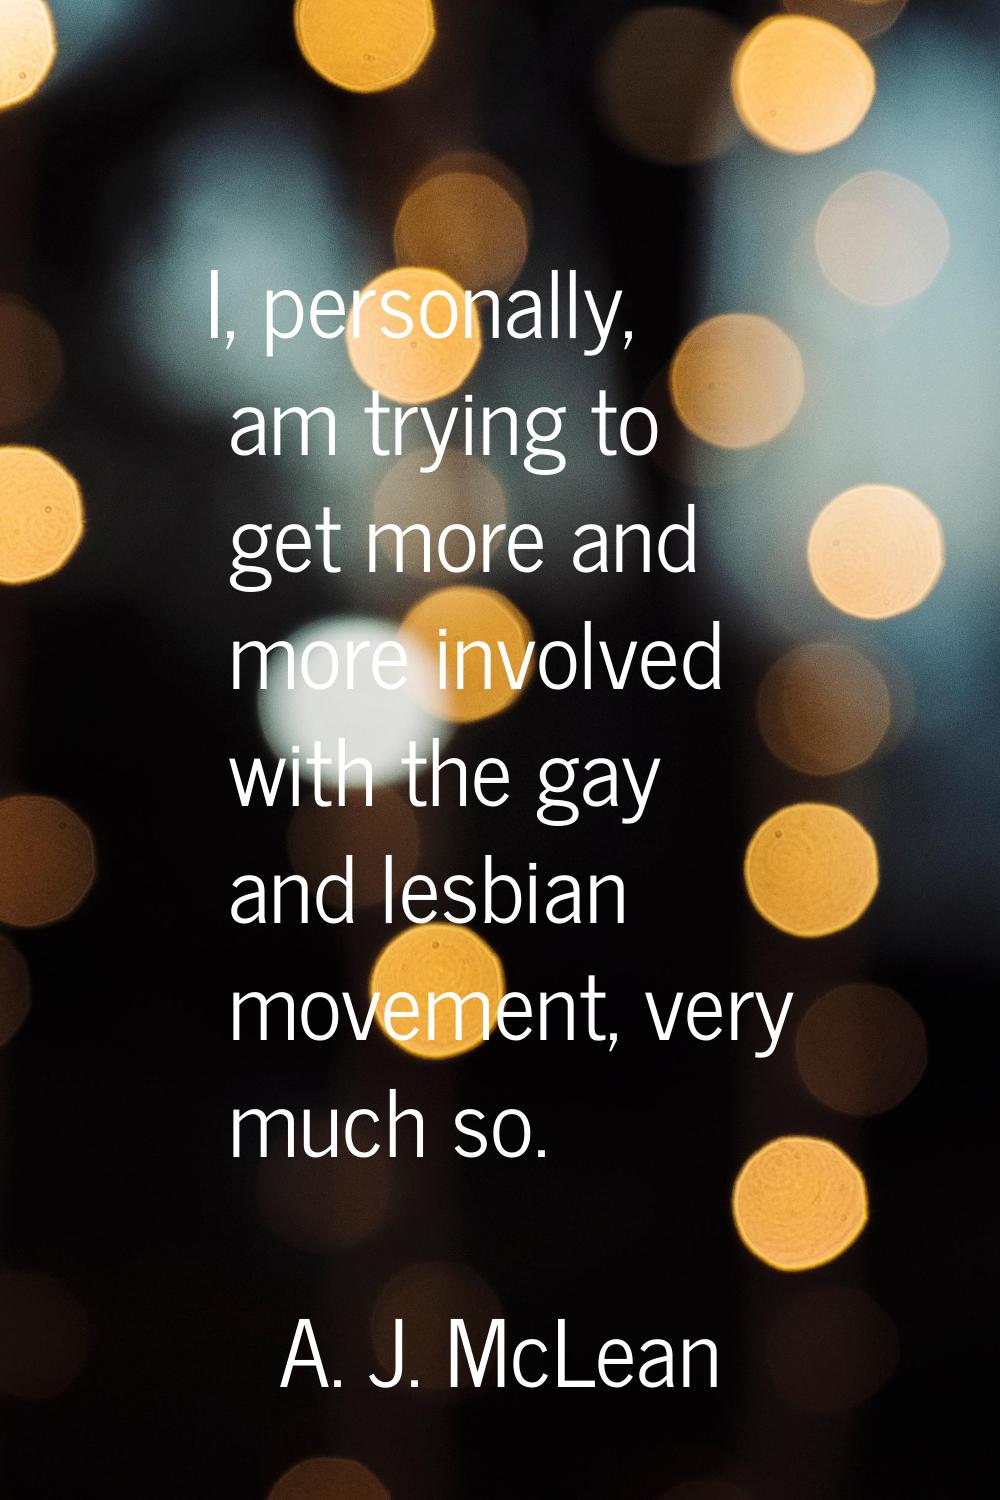 I, personally, am trying to get more and more involved with the gay and lesbian movement, very much